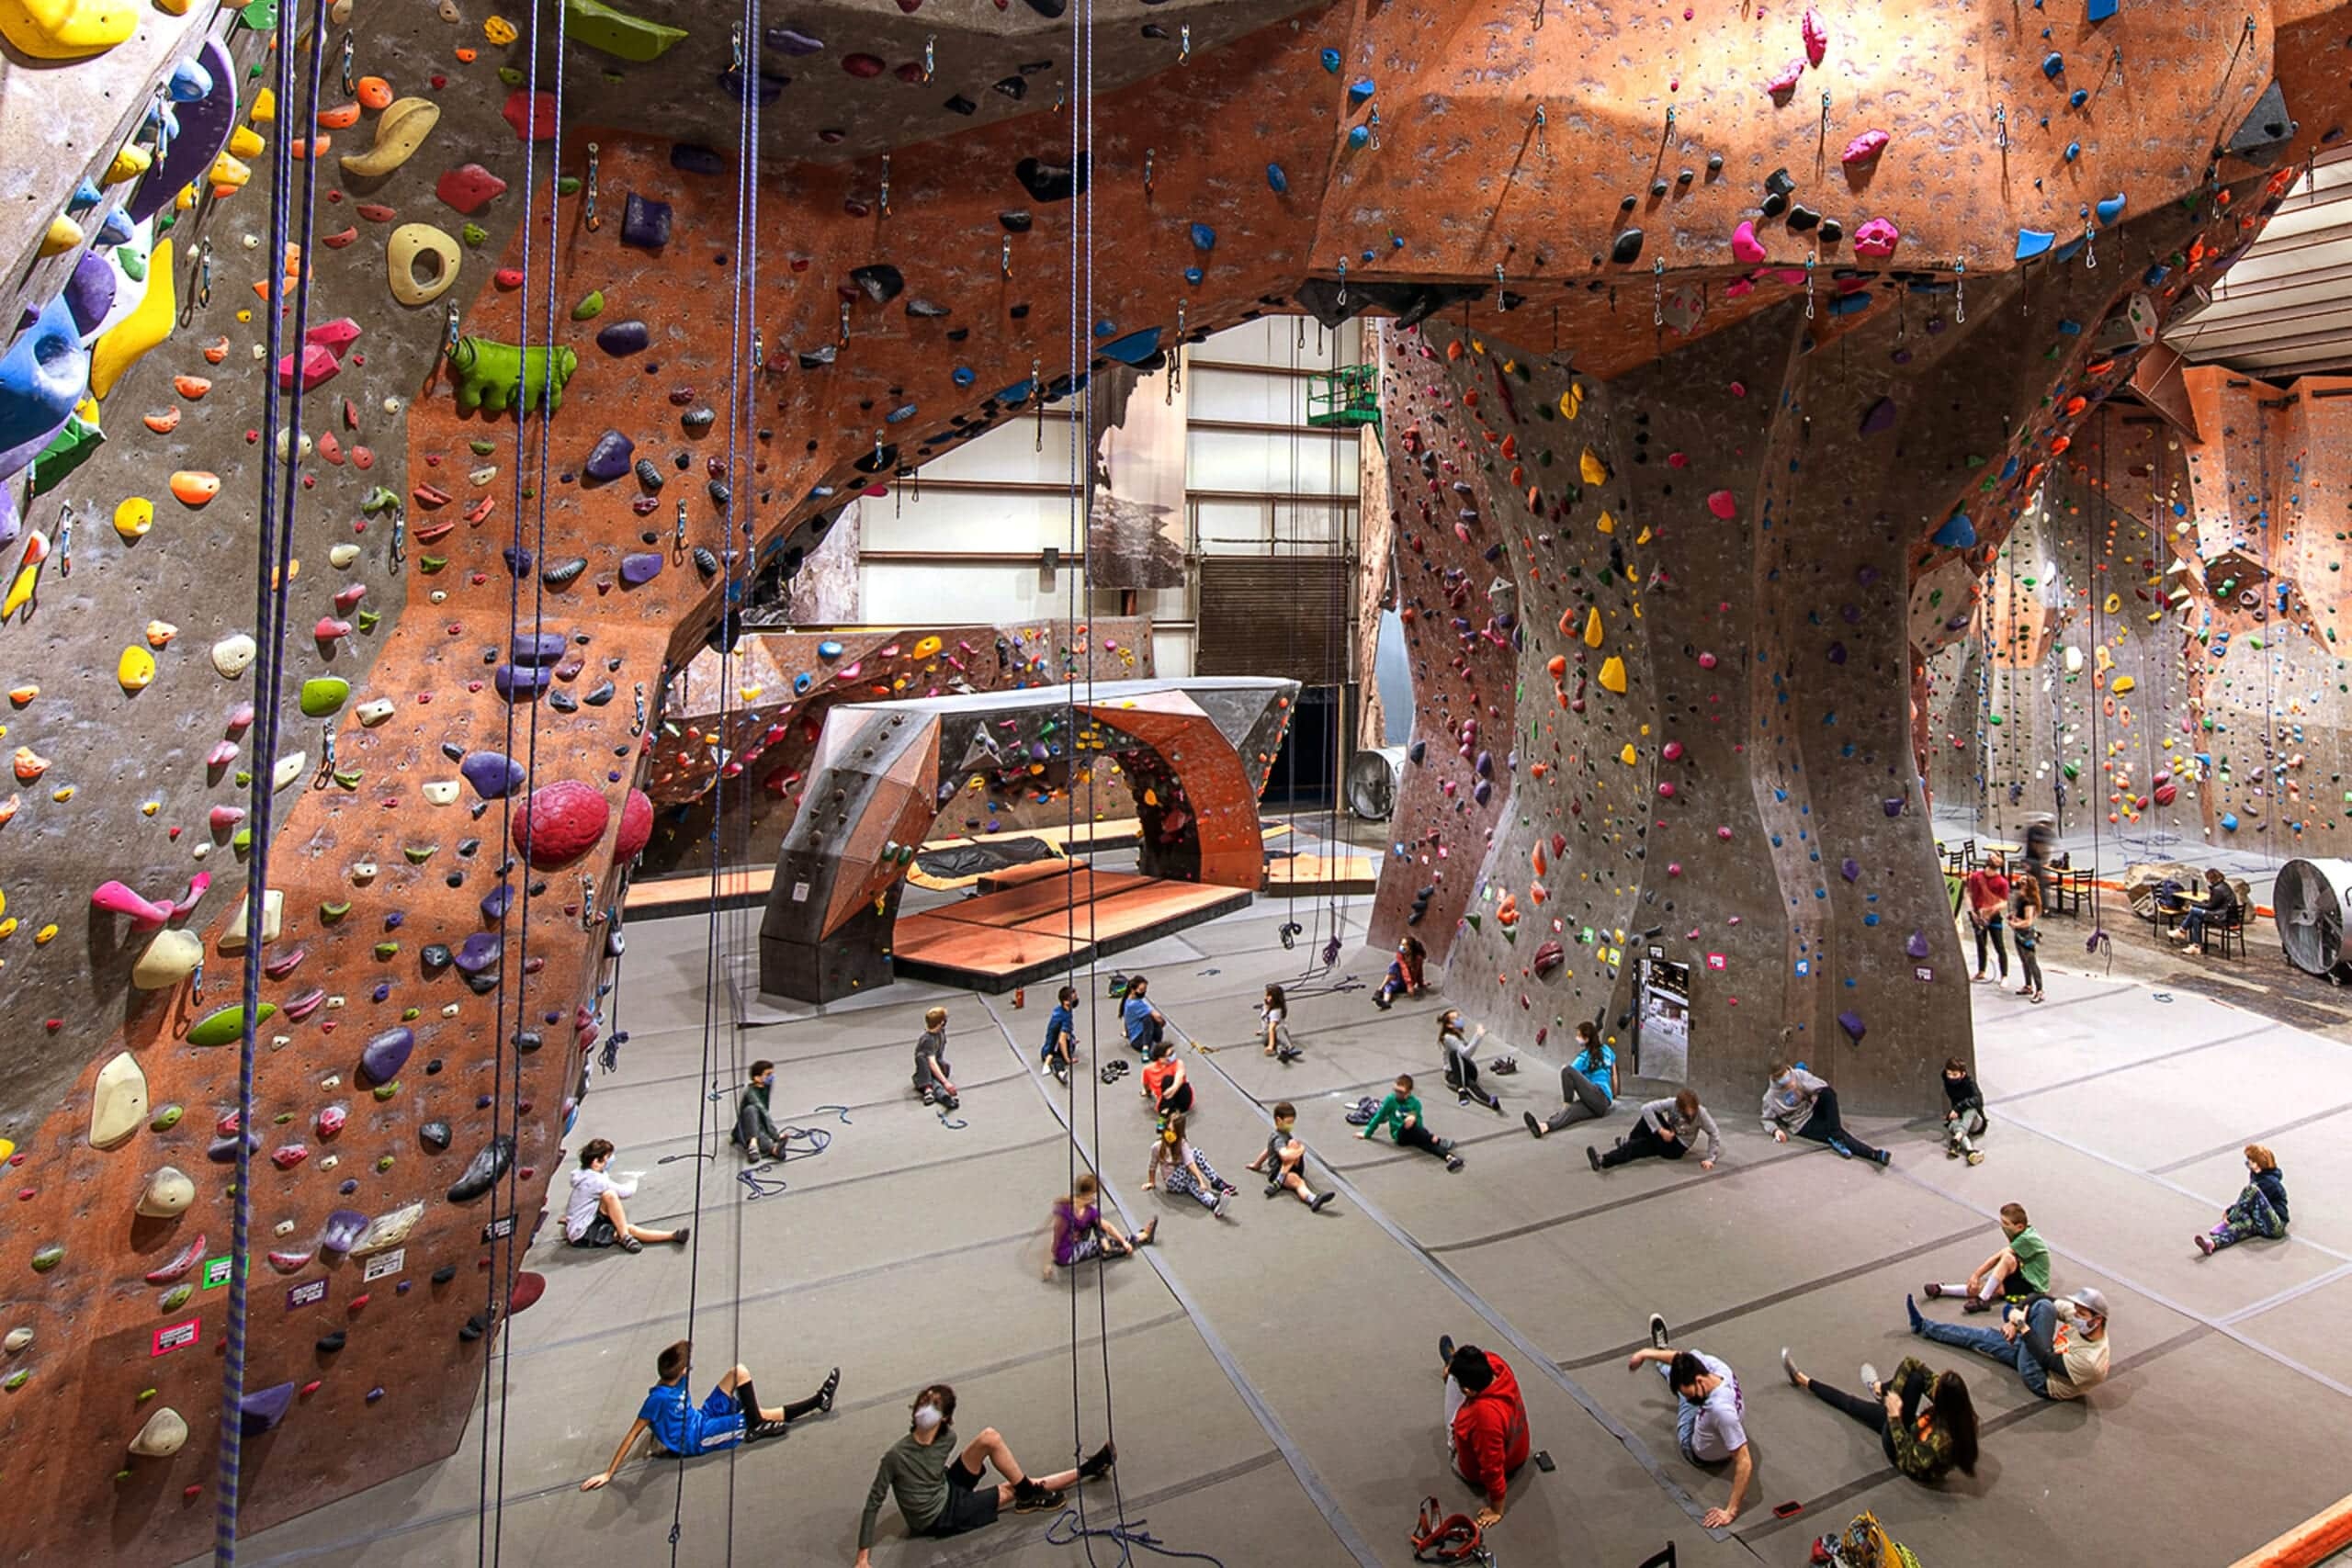 Rock Climbing: Welcome To Visit Vertical Rock Climbing, Fitness Center For Enthusiasts, Amateurs And Beginners In The USA. 2560x1710 HD Background.